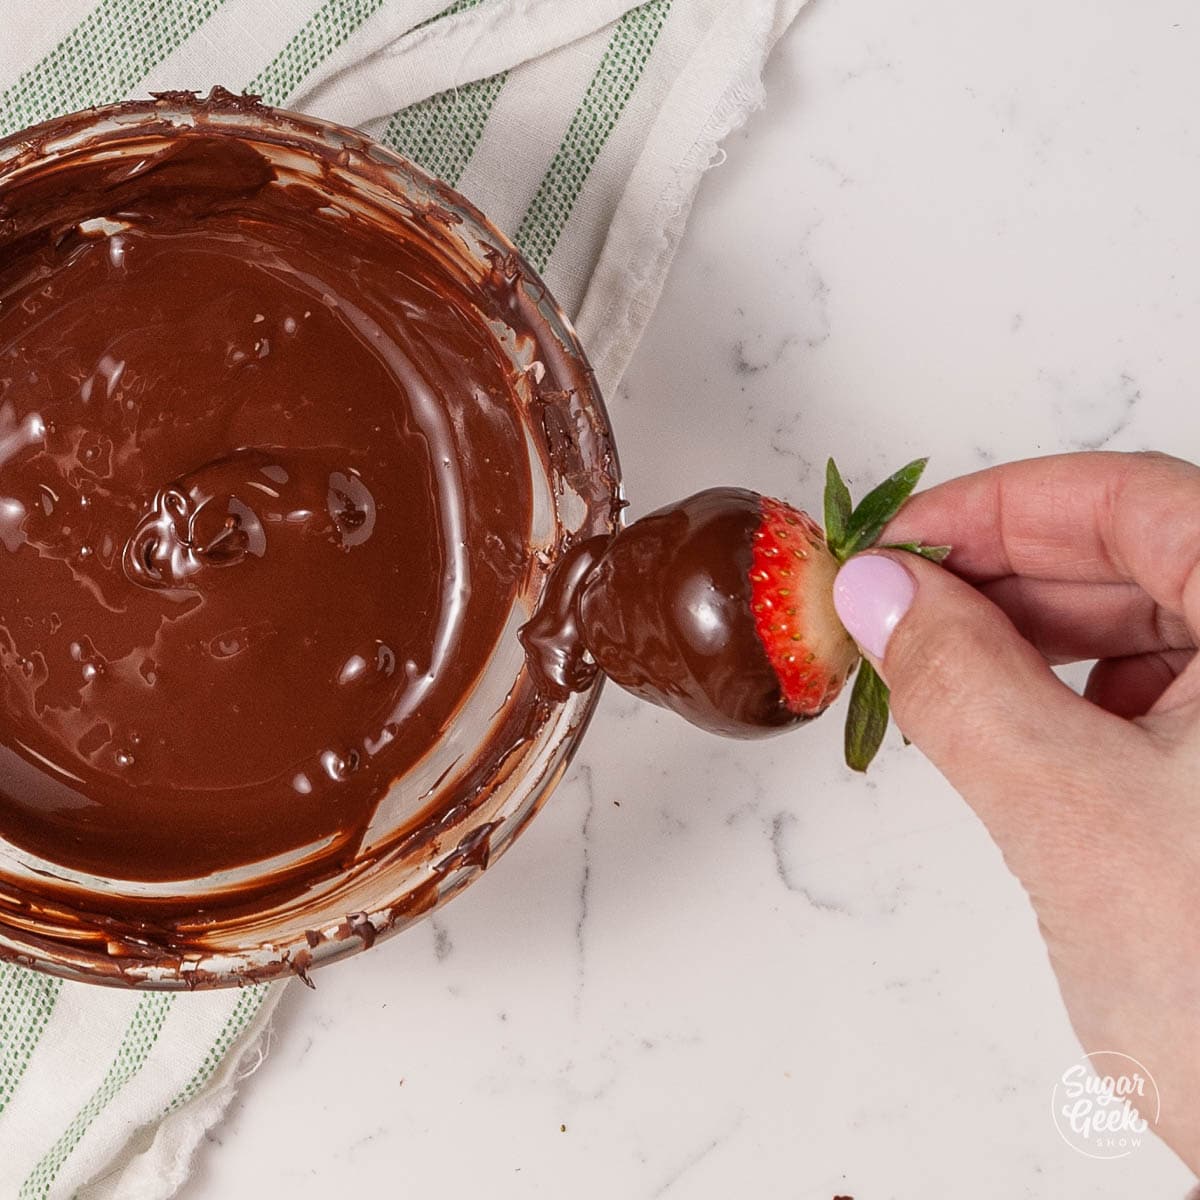 scraping a chocolate covered strawberry on the edge of a bowl from above